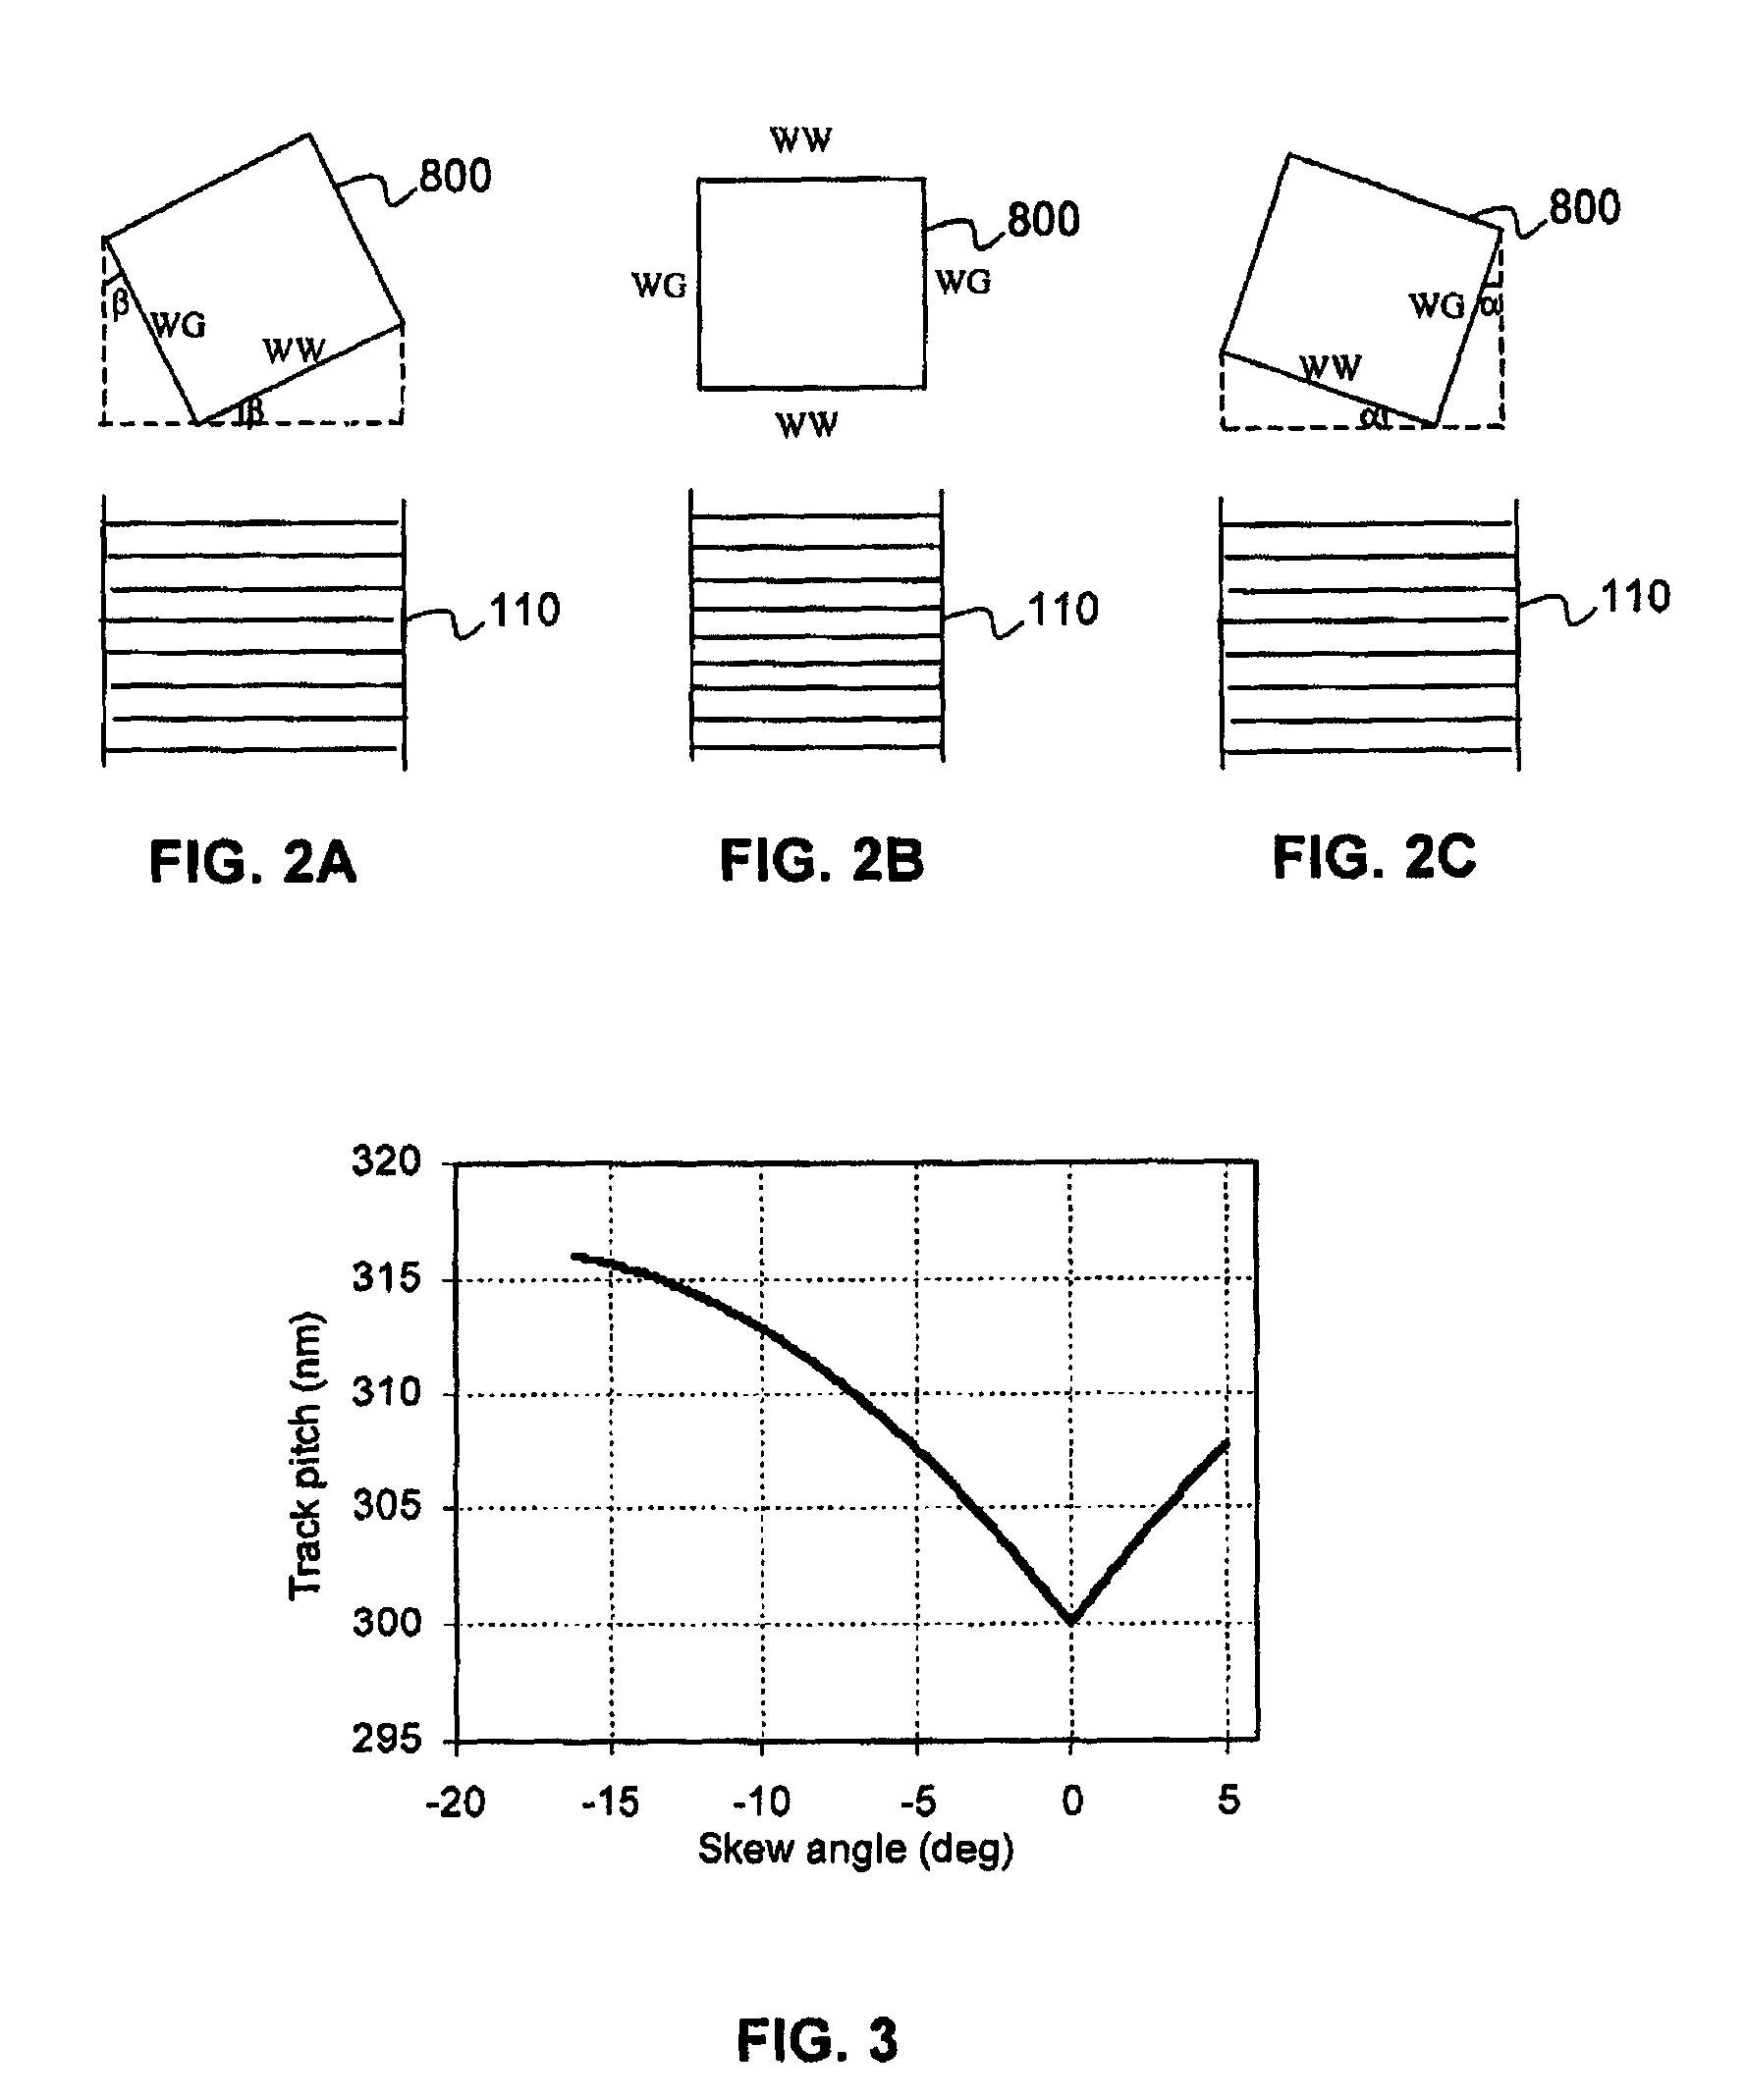 Method for increasing storage capacity and a transducer configuration incorporating the same